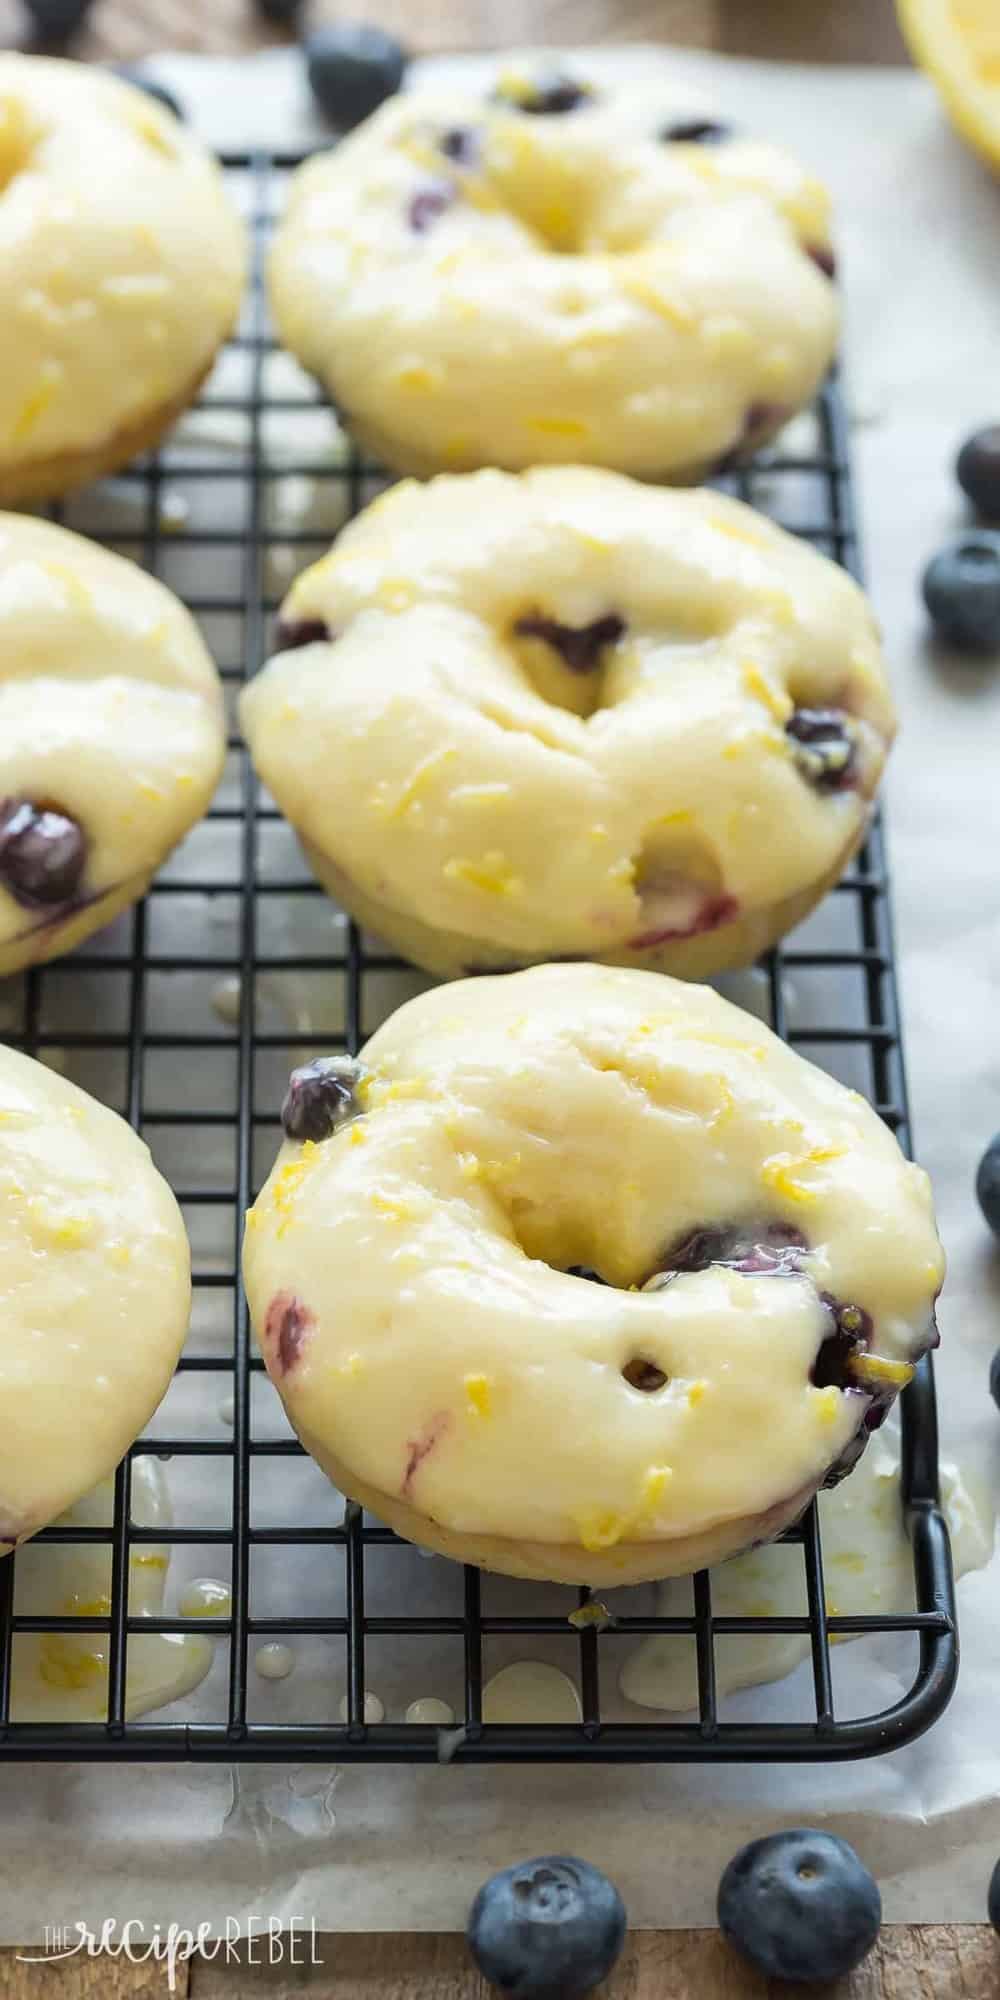 These Baked Lemon Blueberry Doughnuts are fluffy, packed with citrus flavor and bursting with blueberries and covered in a tangy glaze! Baked donuts are the perfect healthy breakfast or snack. Includes step by step recipe video. | baked donuts | lemon recipe | lemon dessert | baking | lemon donuts